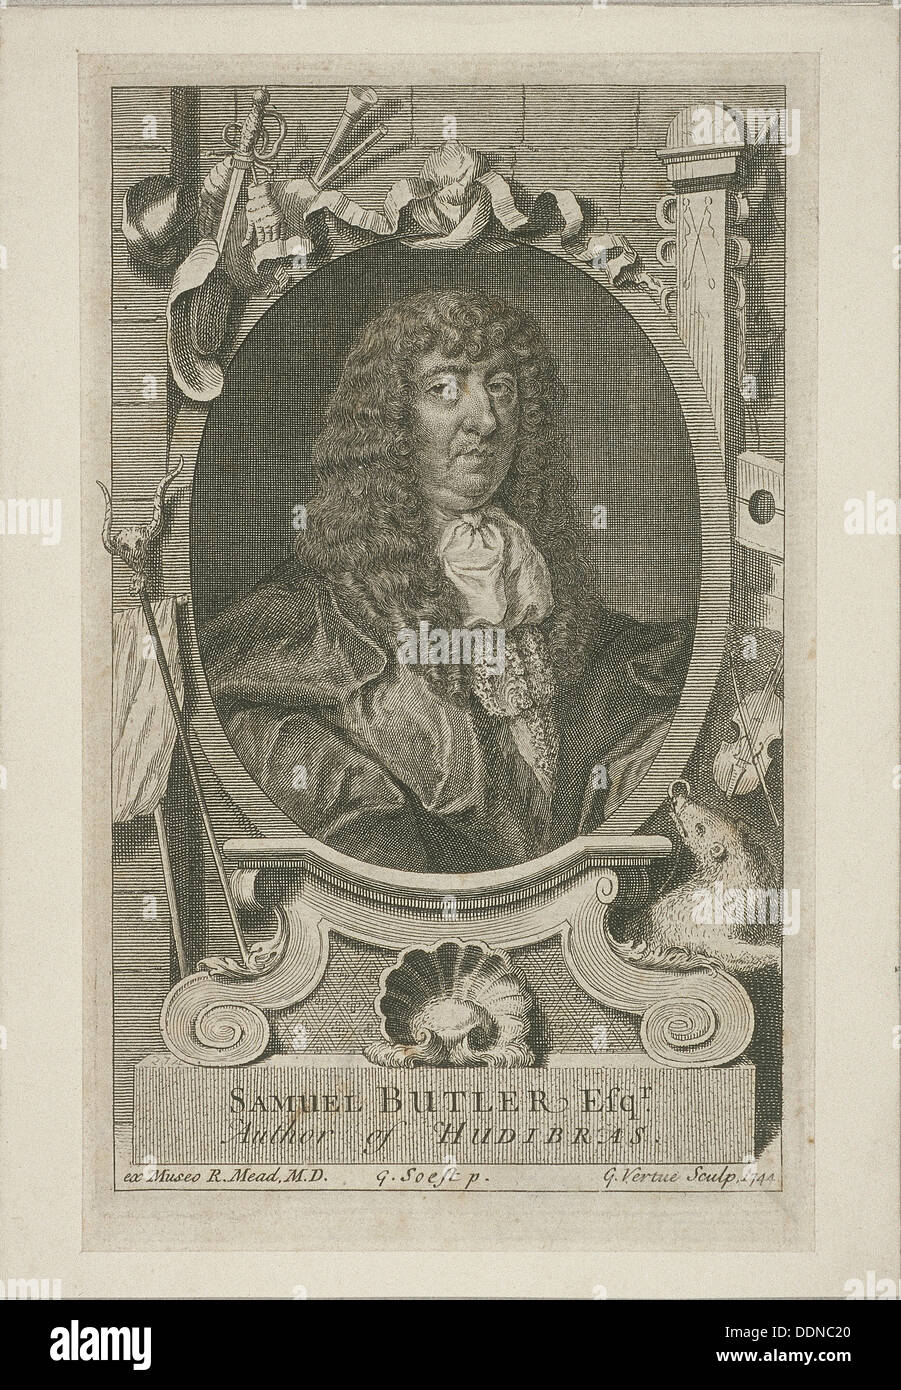 Samuel Butler in wig and robes, 1744. Artist: George Vertue Stock Photo